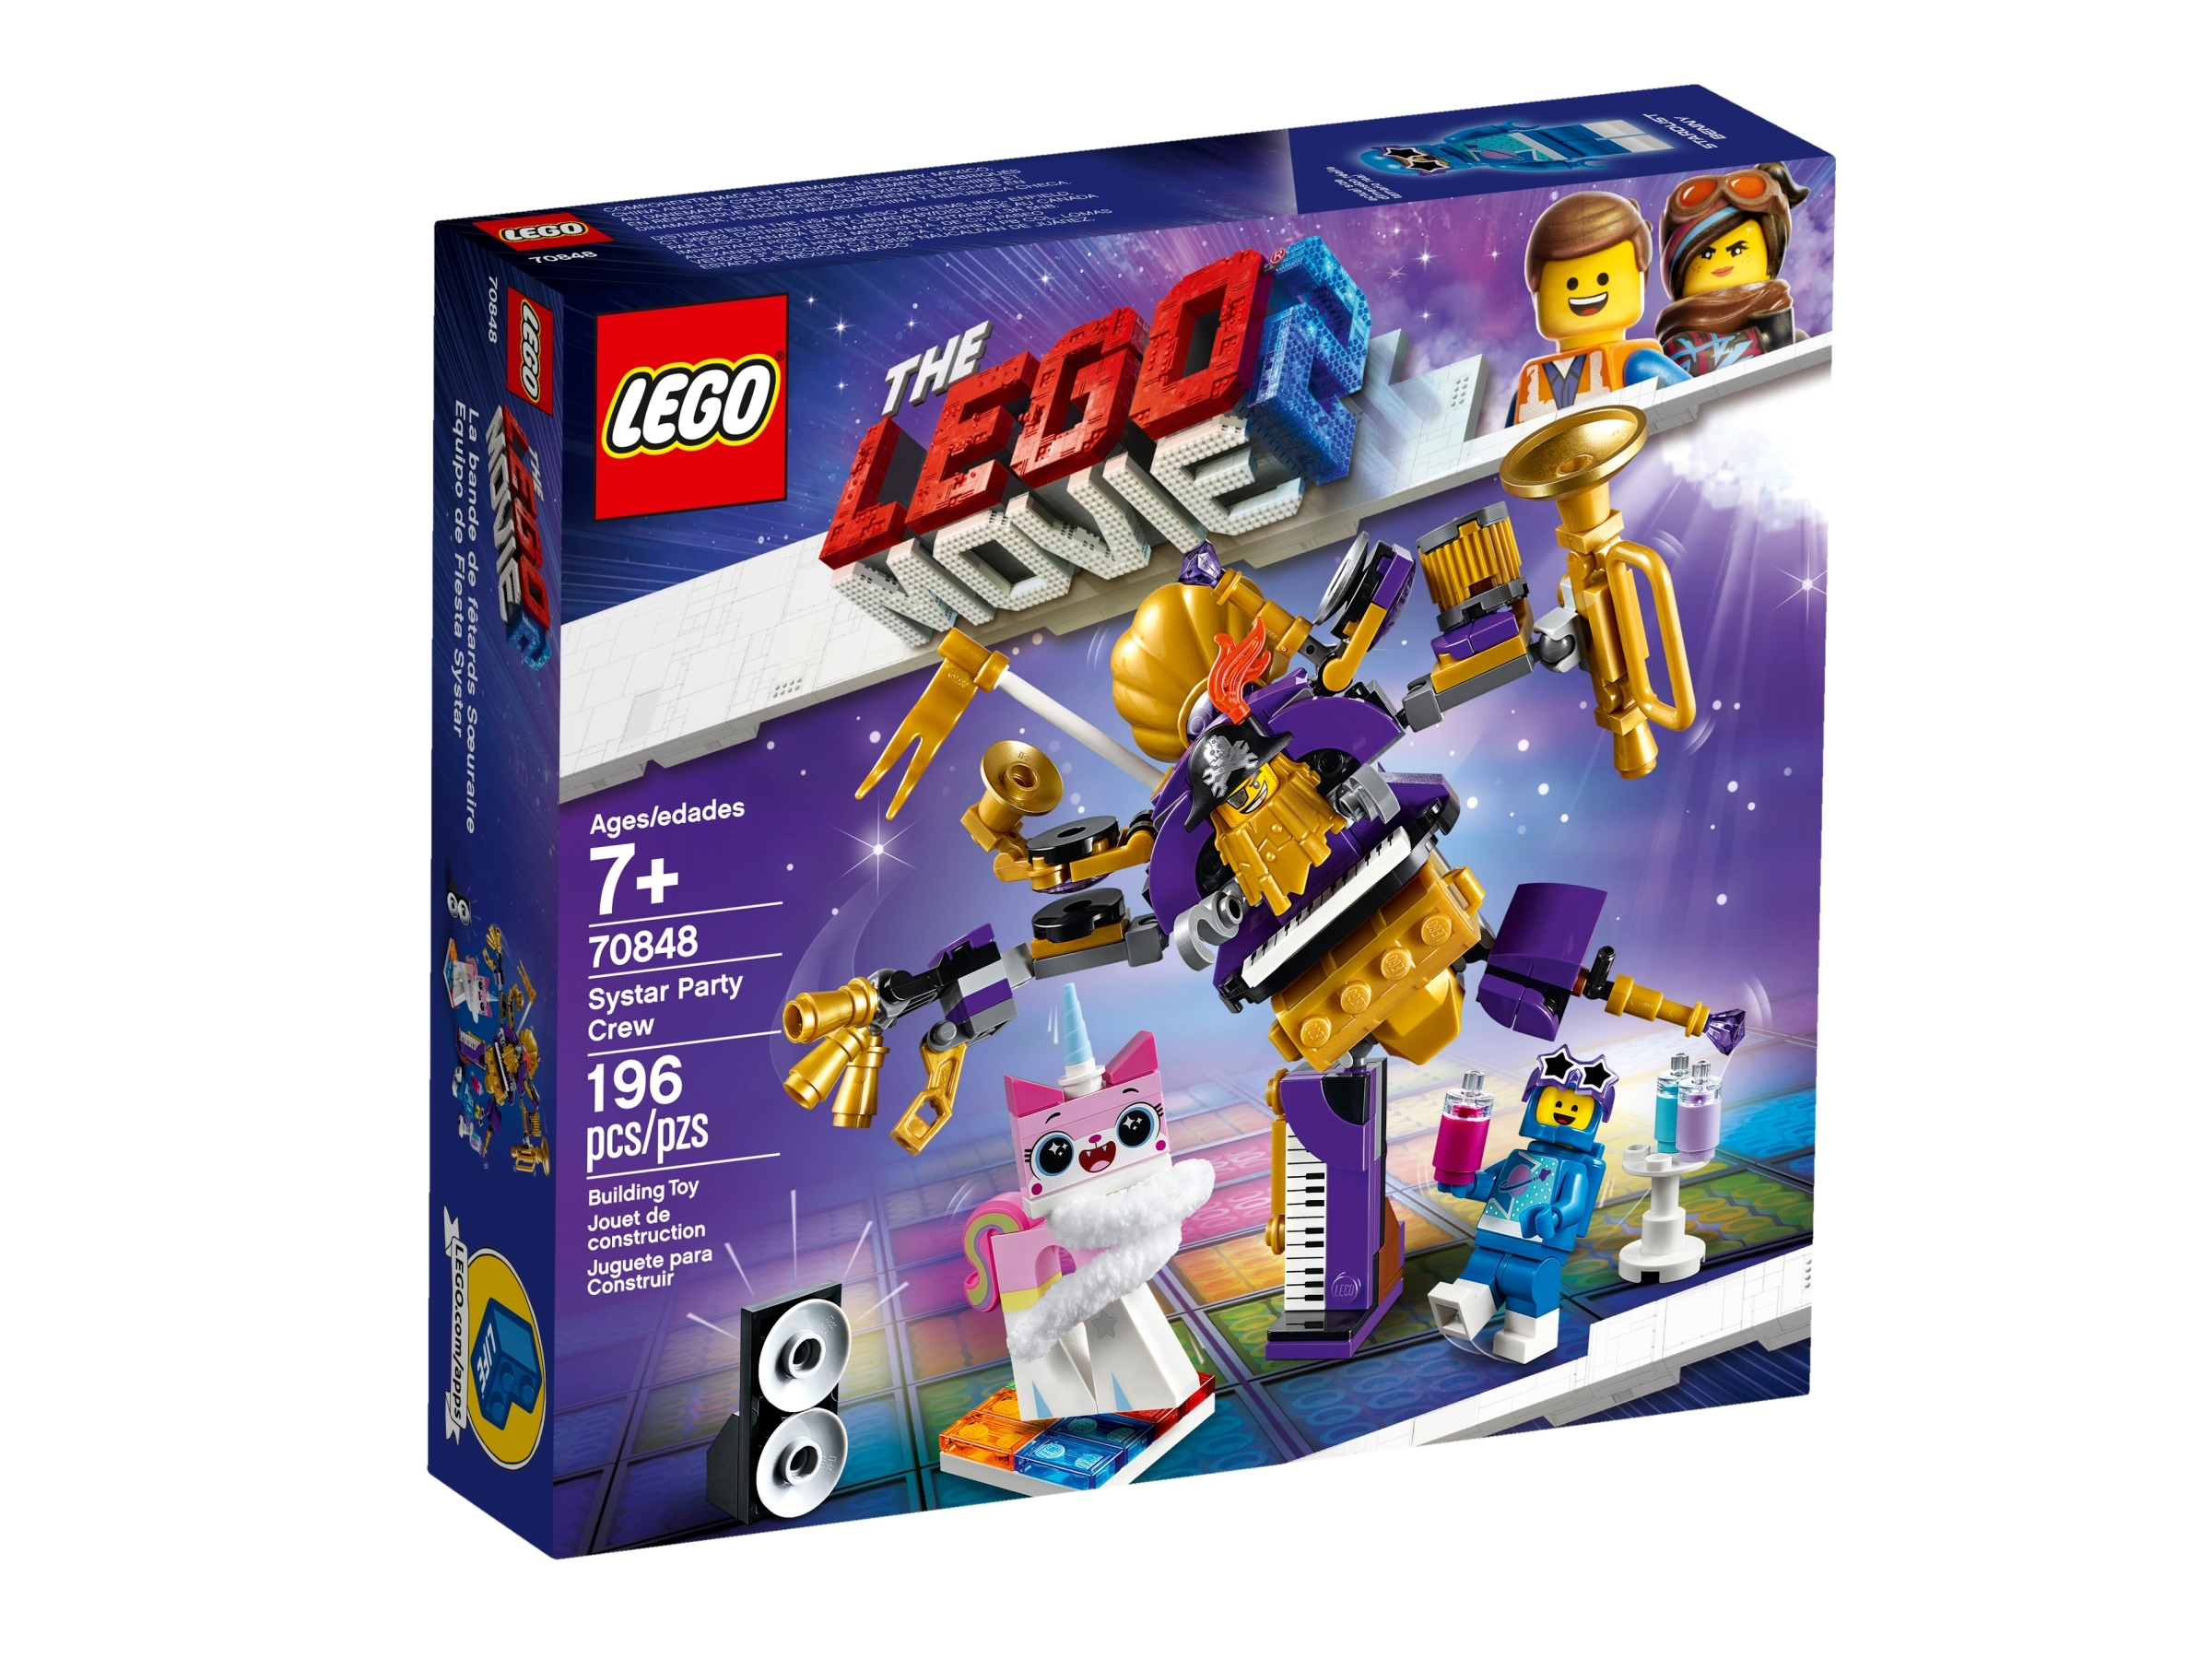 LEGO 70848 The LEGO Movie 2 Systar Party Crew NEW Free Shipping 